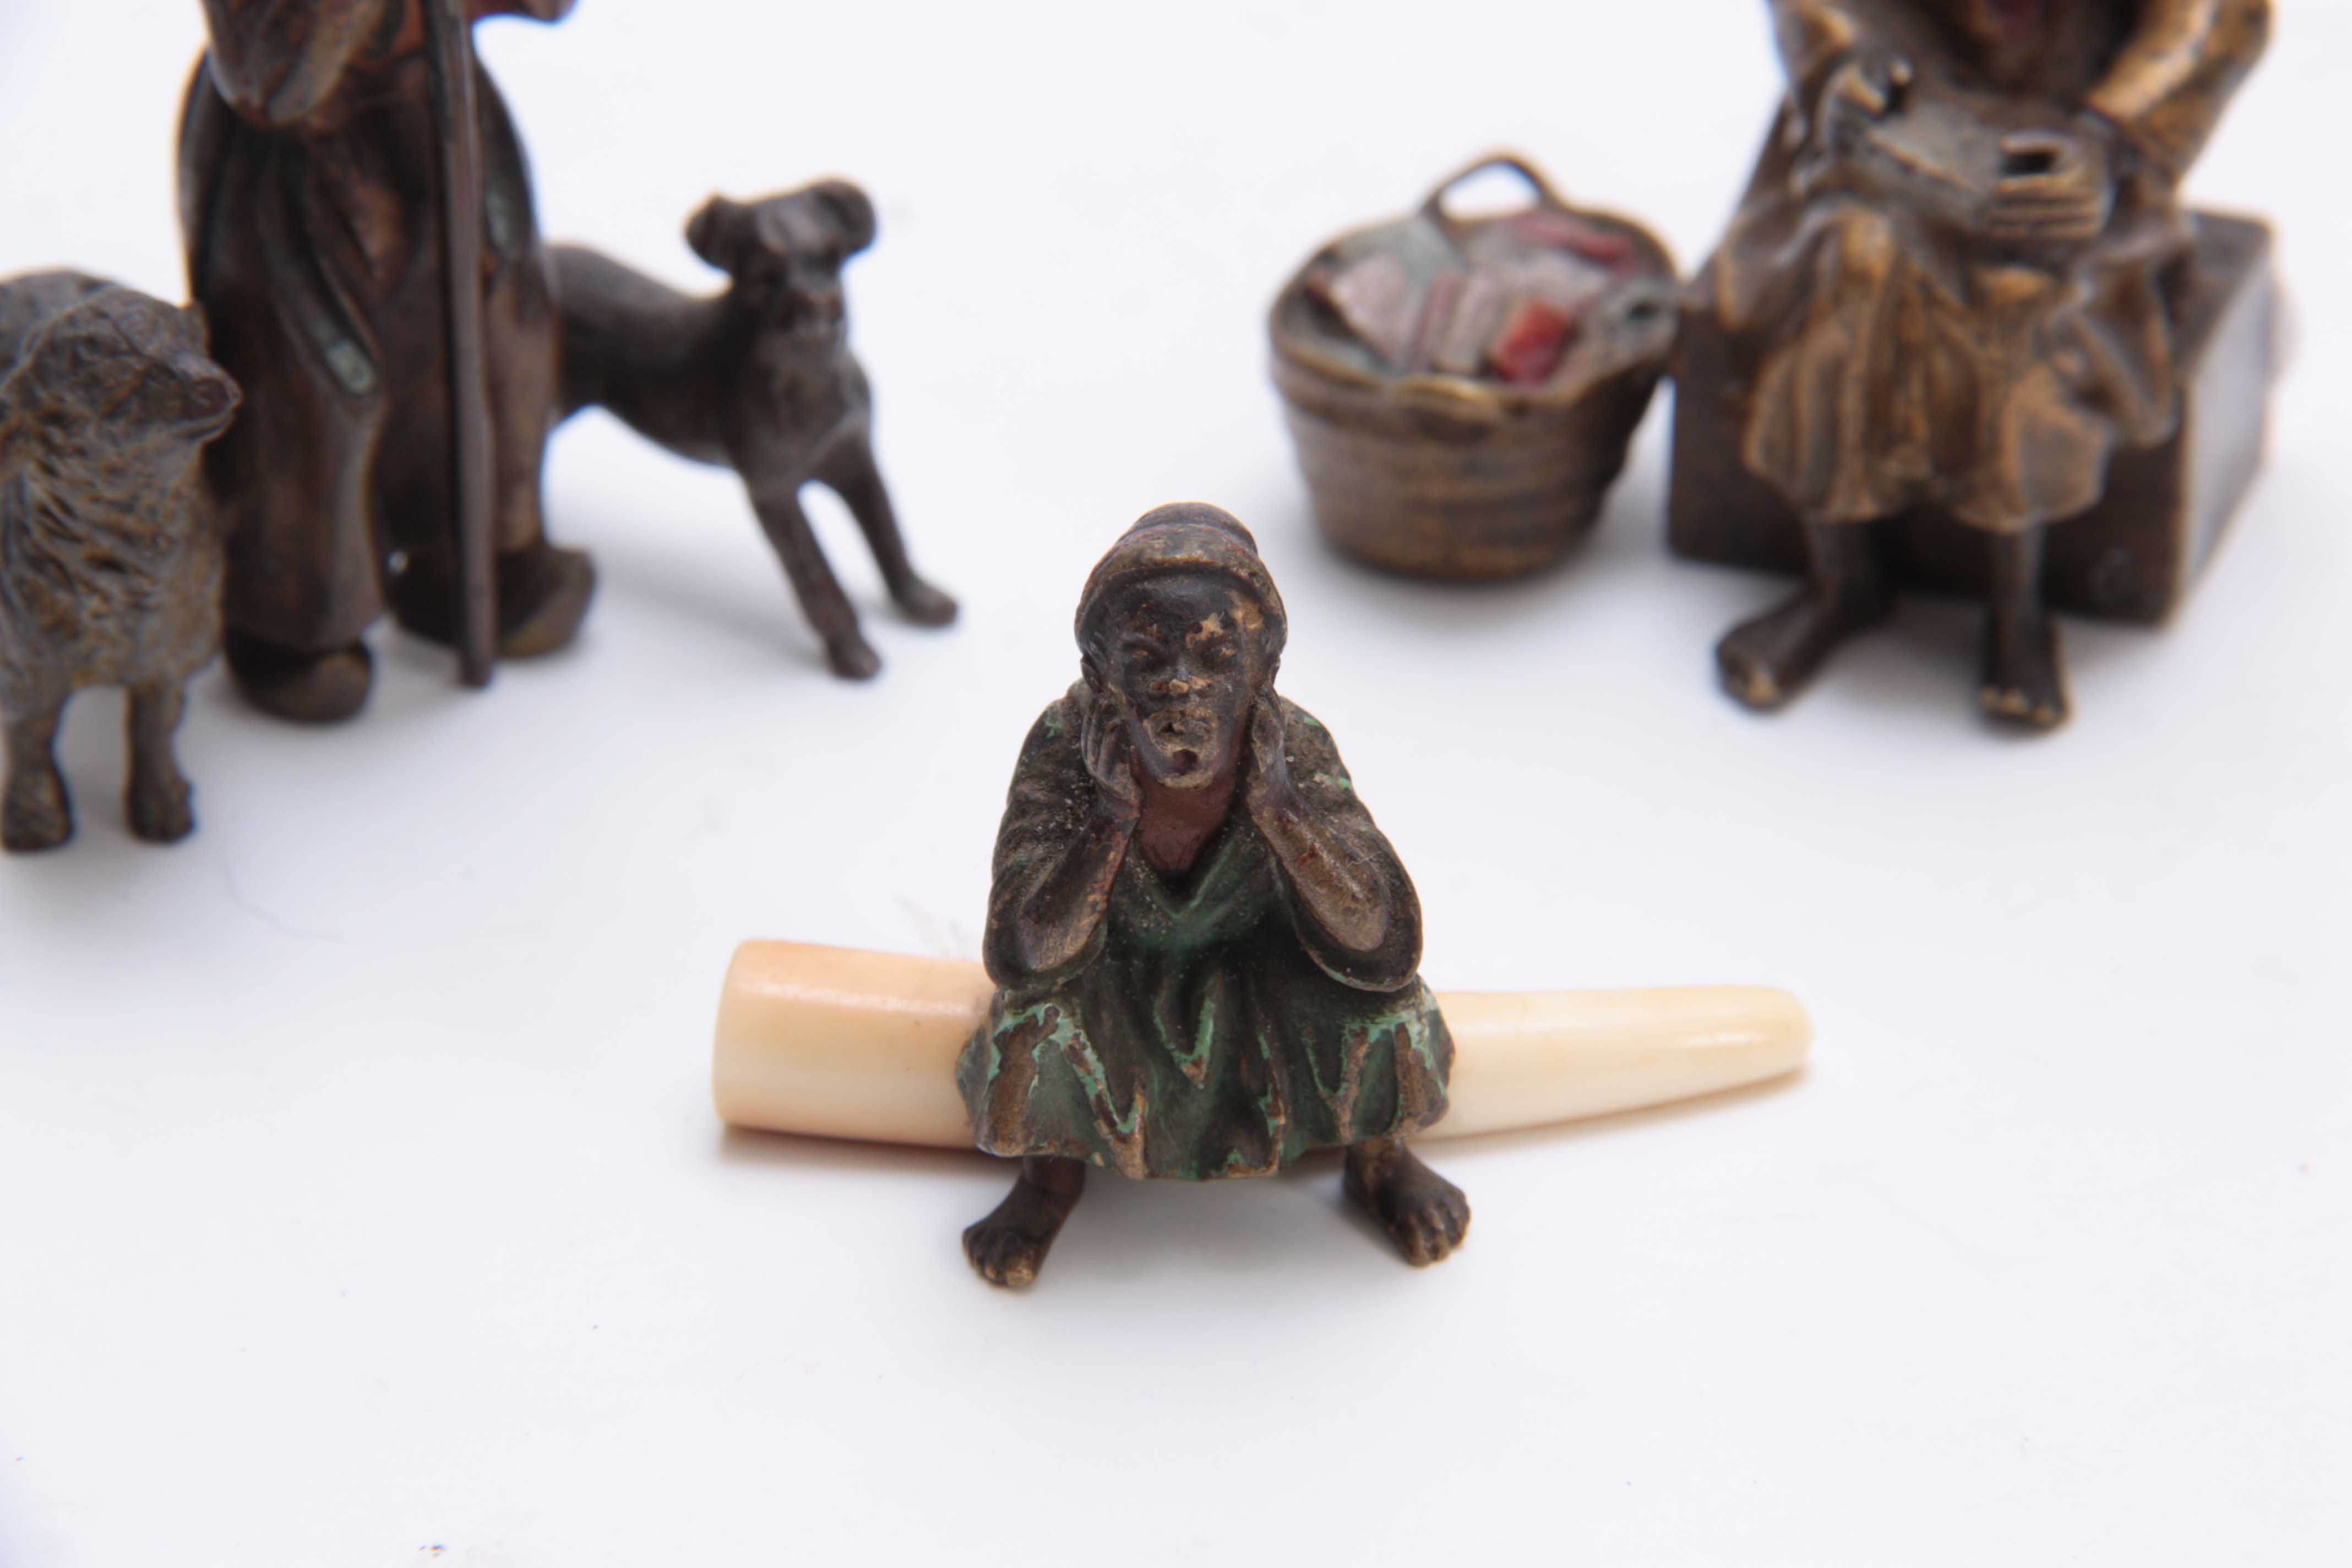 A COLLECTION OF THREE EARLY 20th CENTURY COLD PAINTED BRONZE FIGURES modelled as an Arab bookseller, - Image 4 of 5